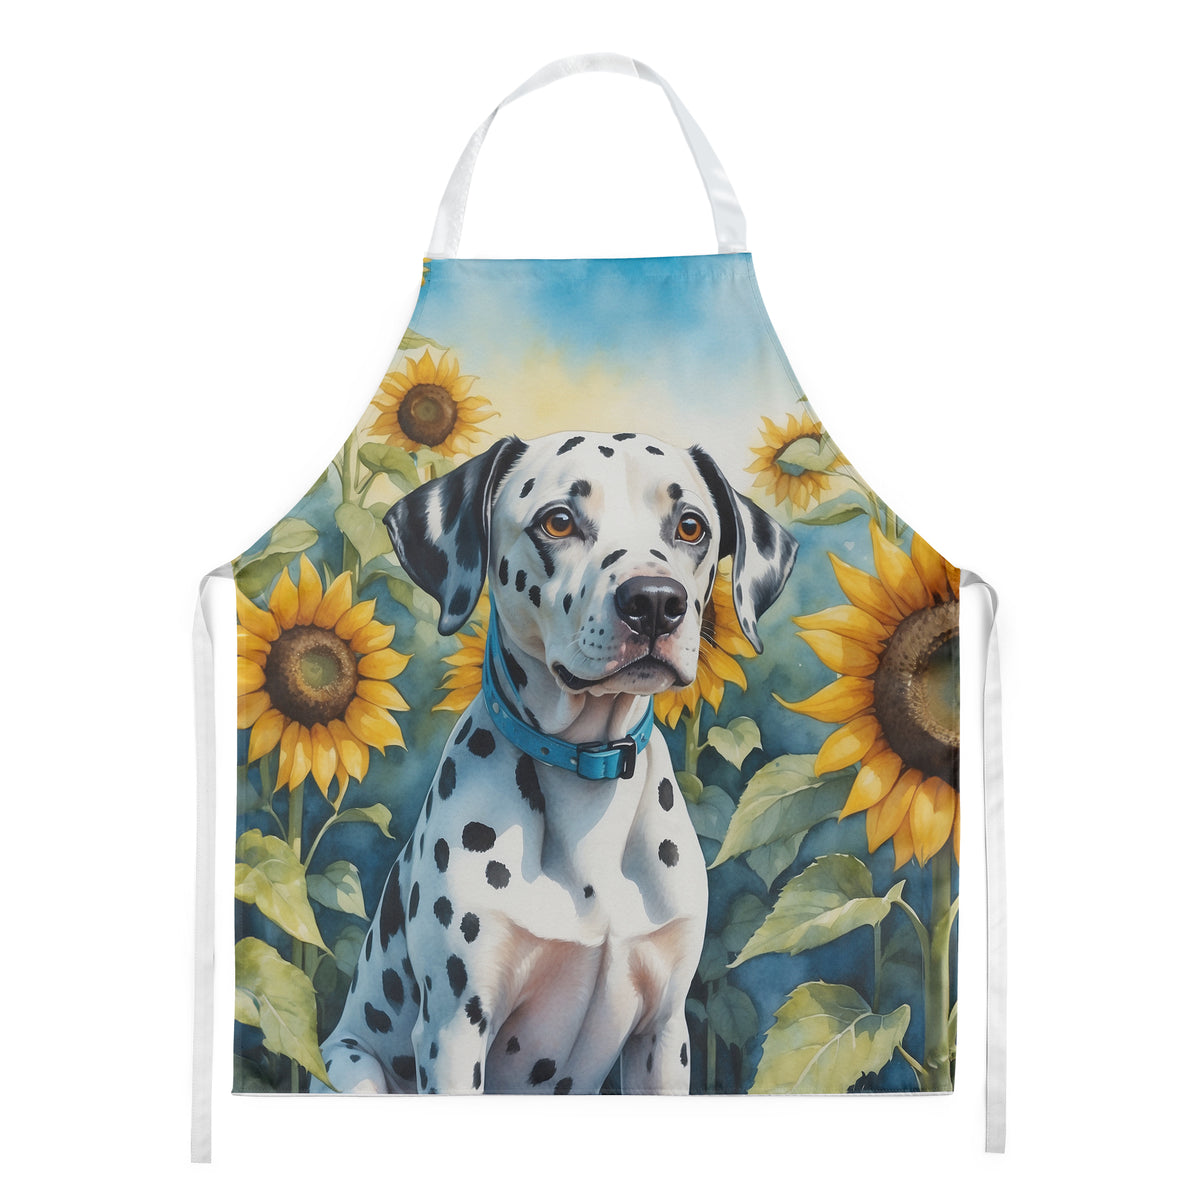 Buy this Dalmatian in Sunflowers Apron